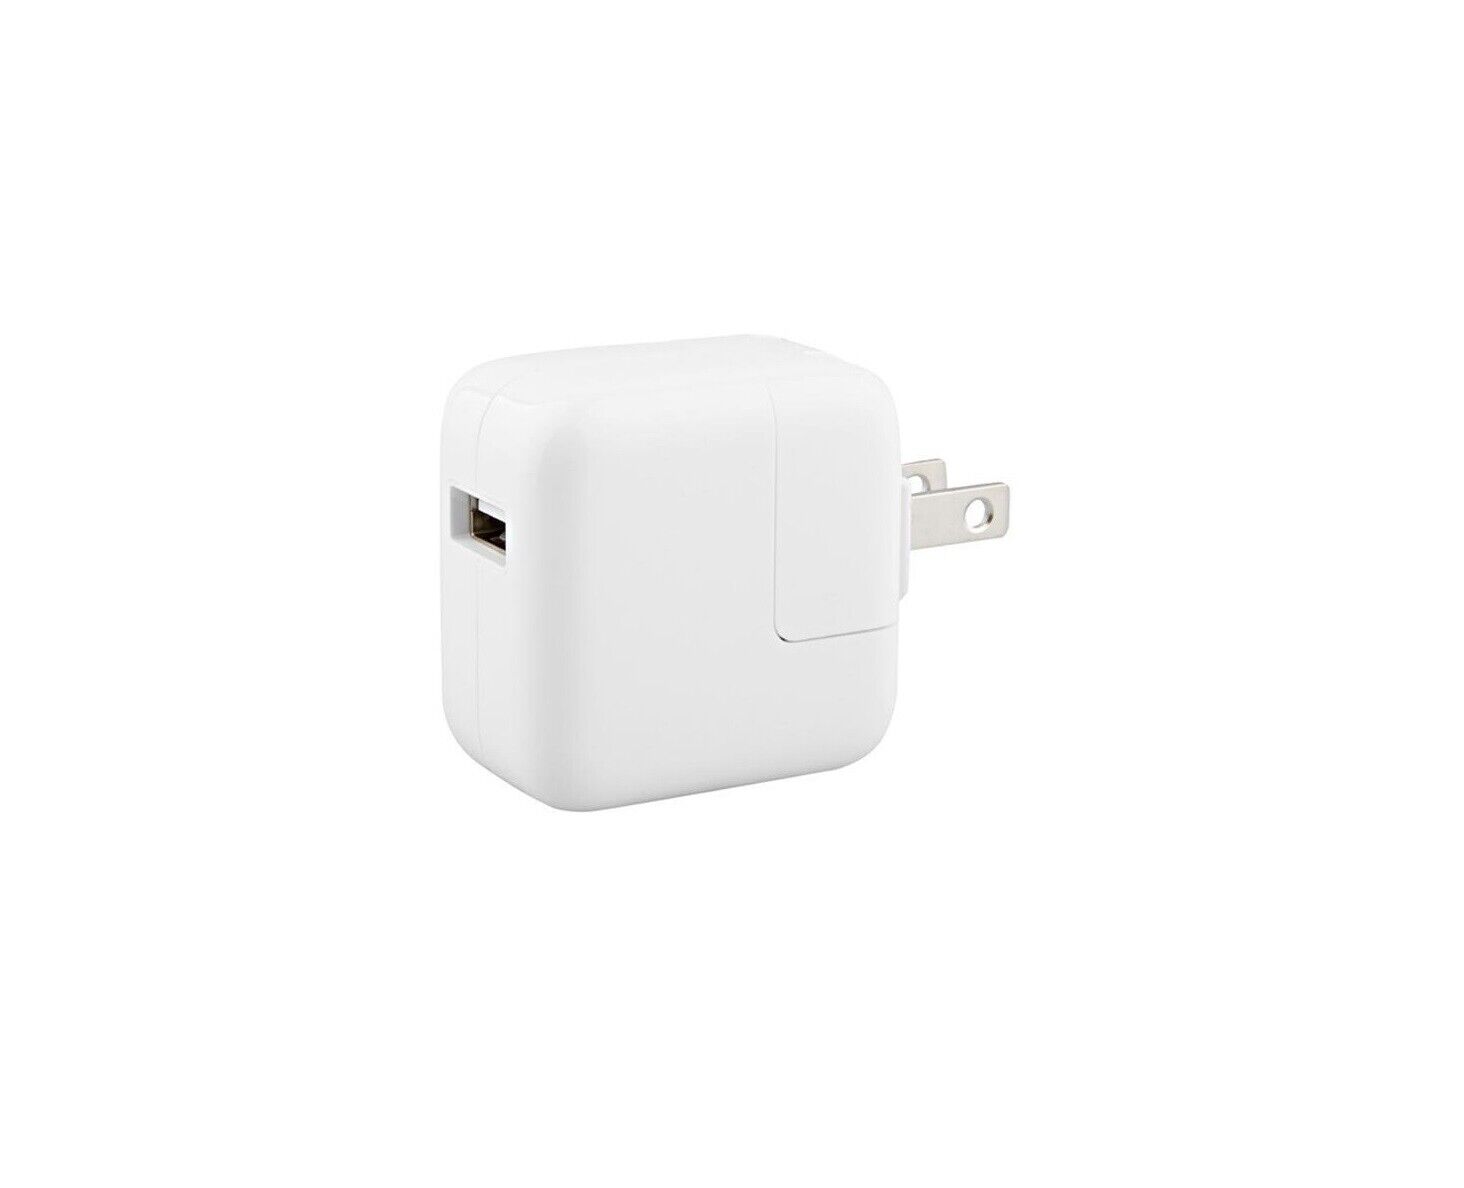 Apple 12W USB Power Adapter Genuine OEM Wall Charger Lightning Cable iPad 2 3 4